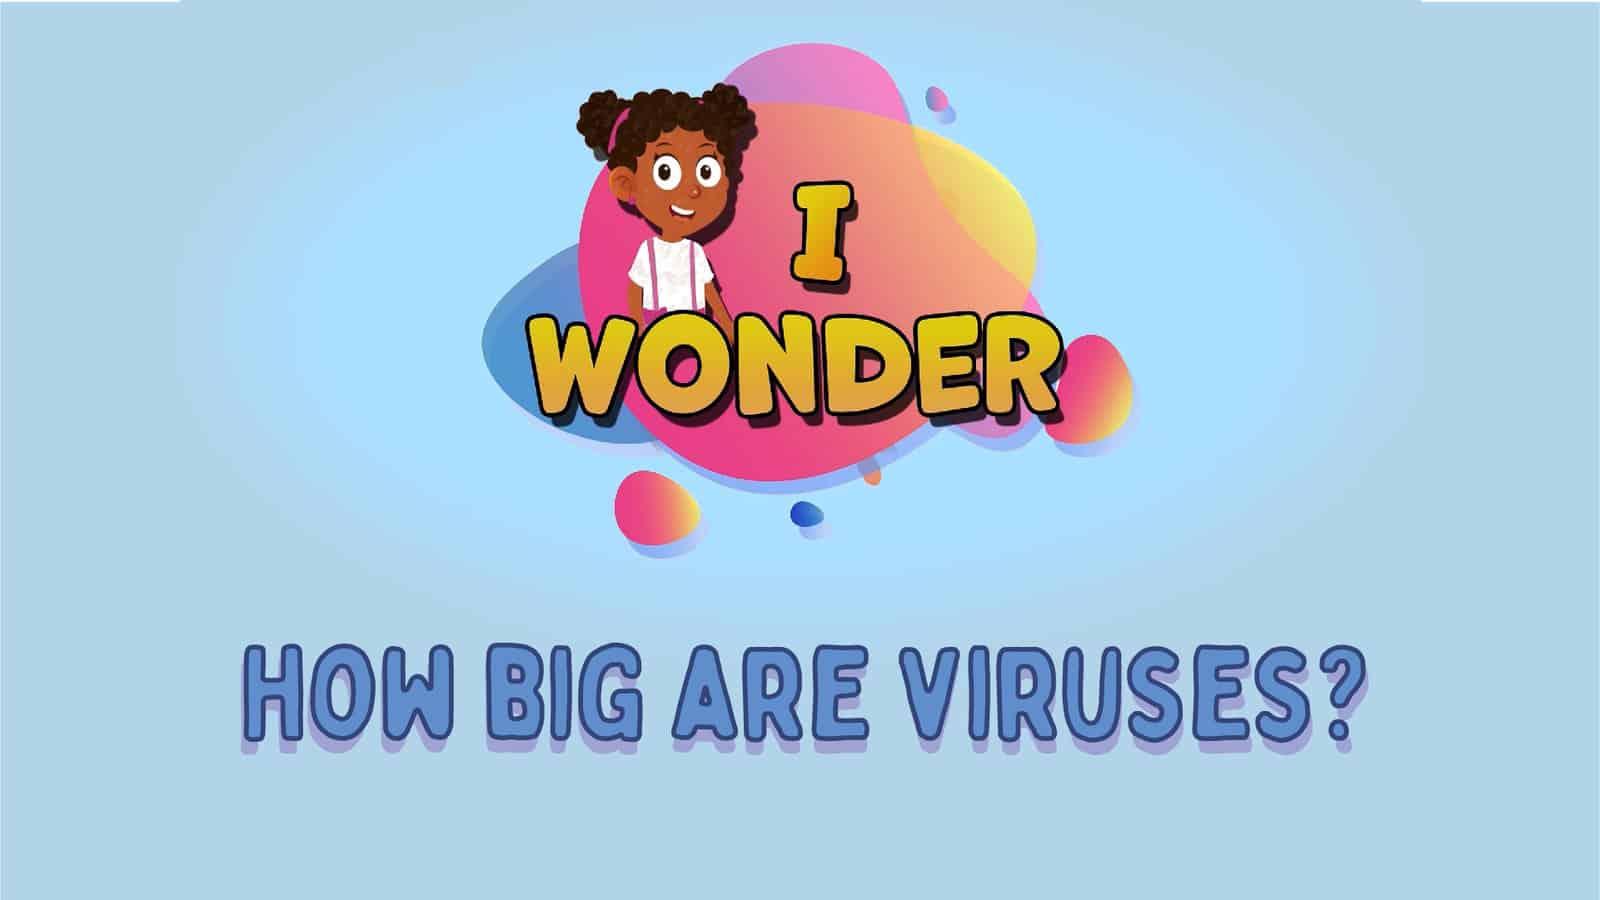 How Big Are Viruses?